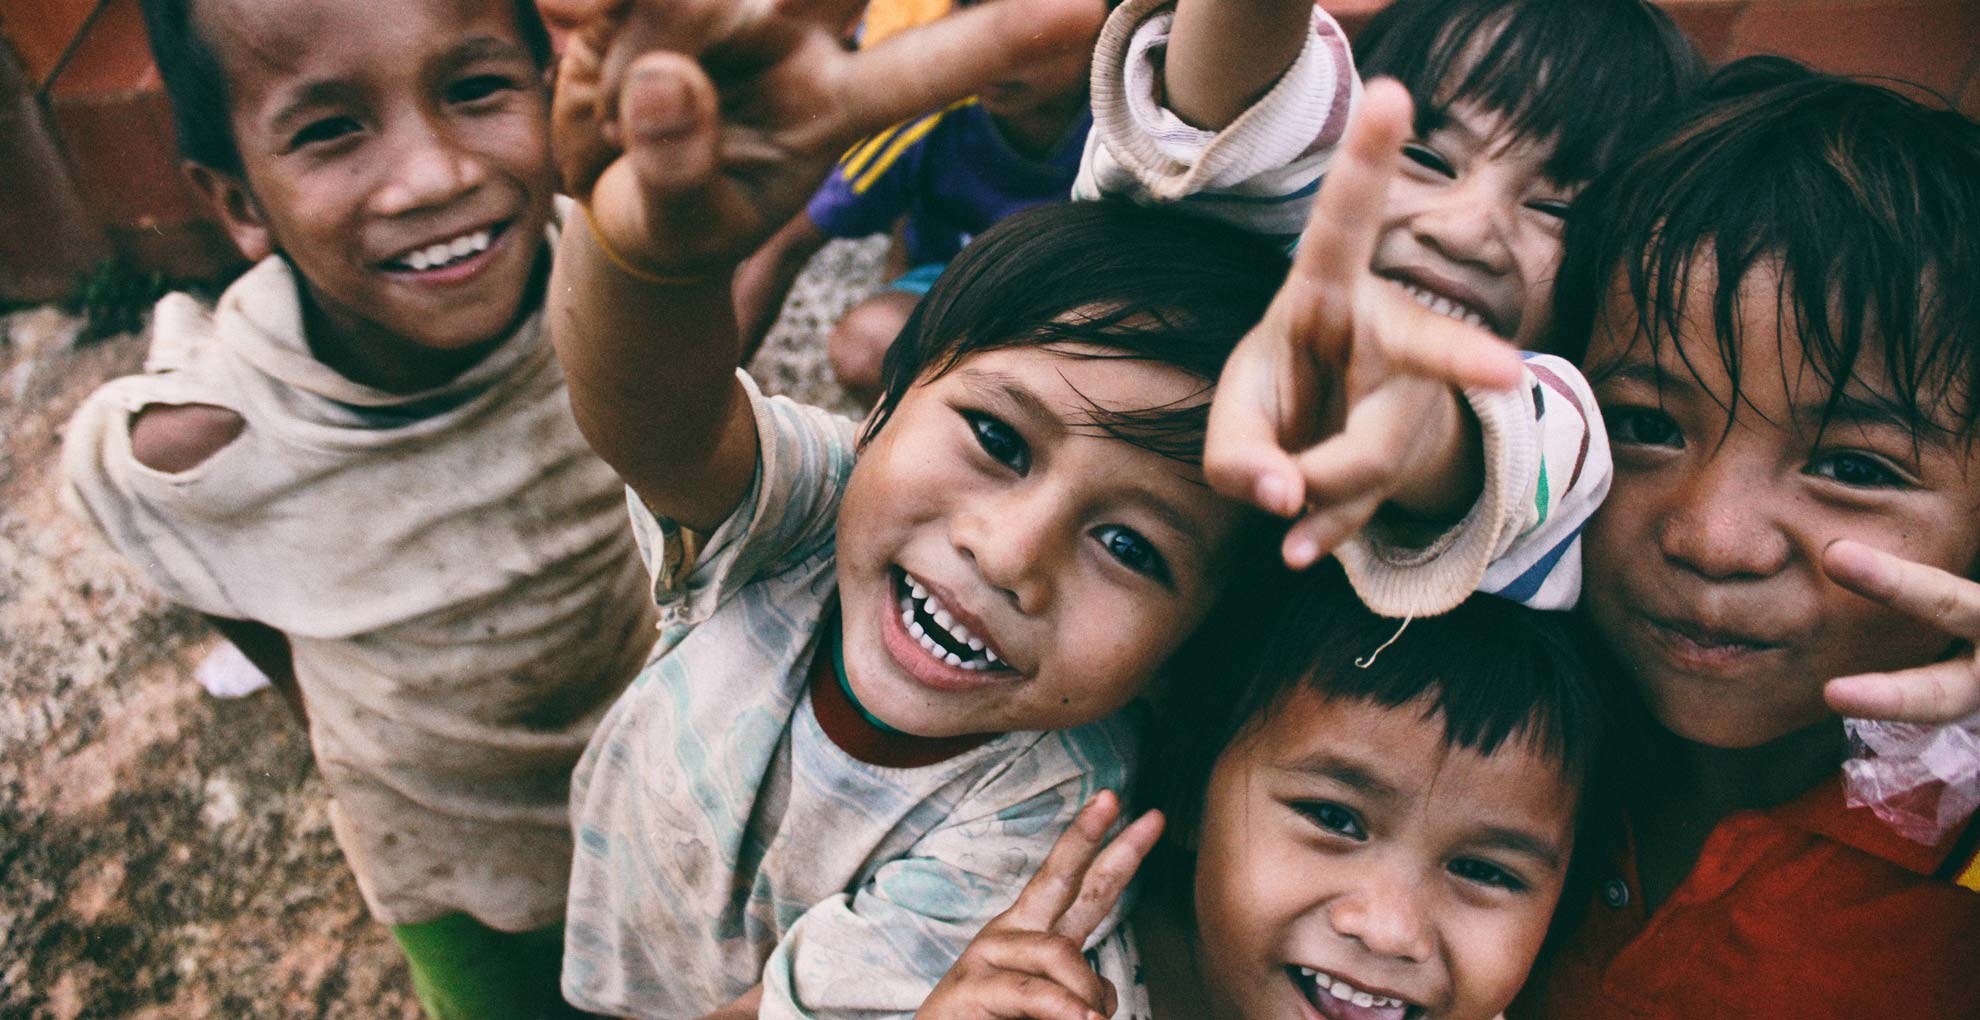 A group of children smile for the camera in Vietnam. Photo: Larm Rmah/Unsplash